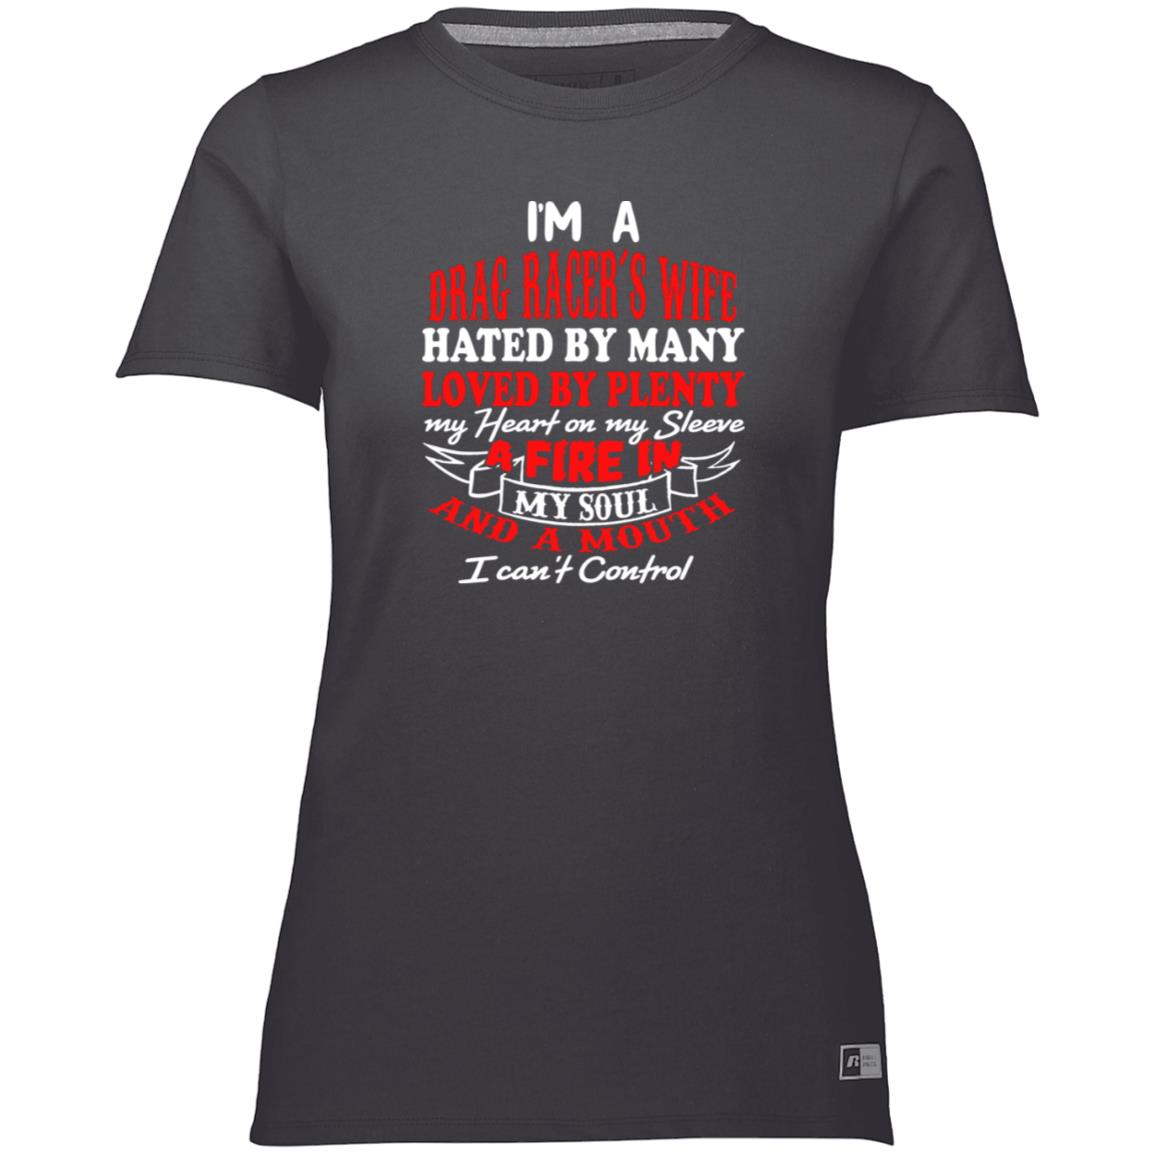 I'm A Drag Racer's Wife Hated By Many Loved By Plenty Ladies’ Essential Dri-Power Tee